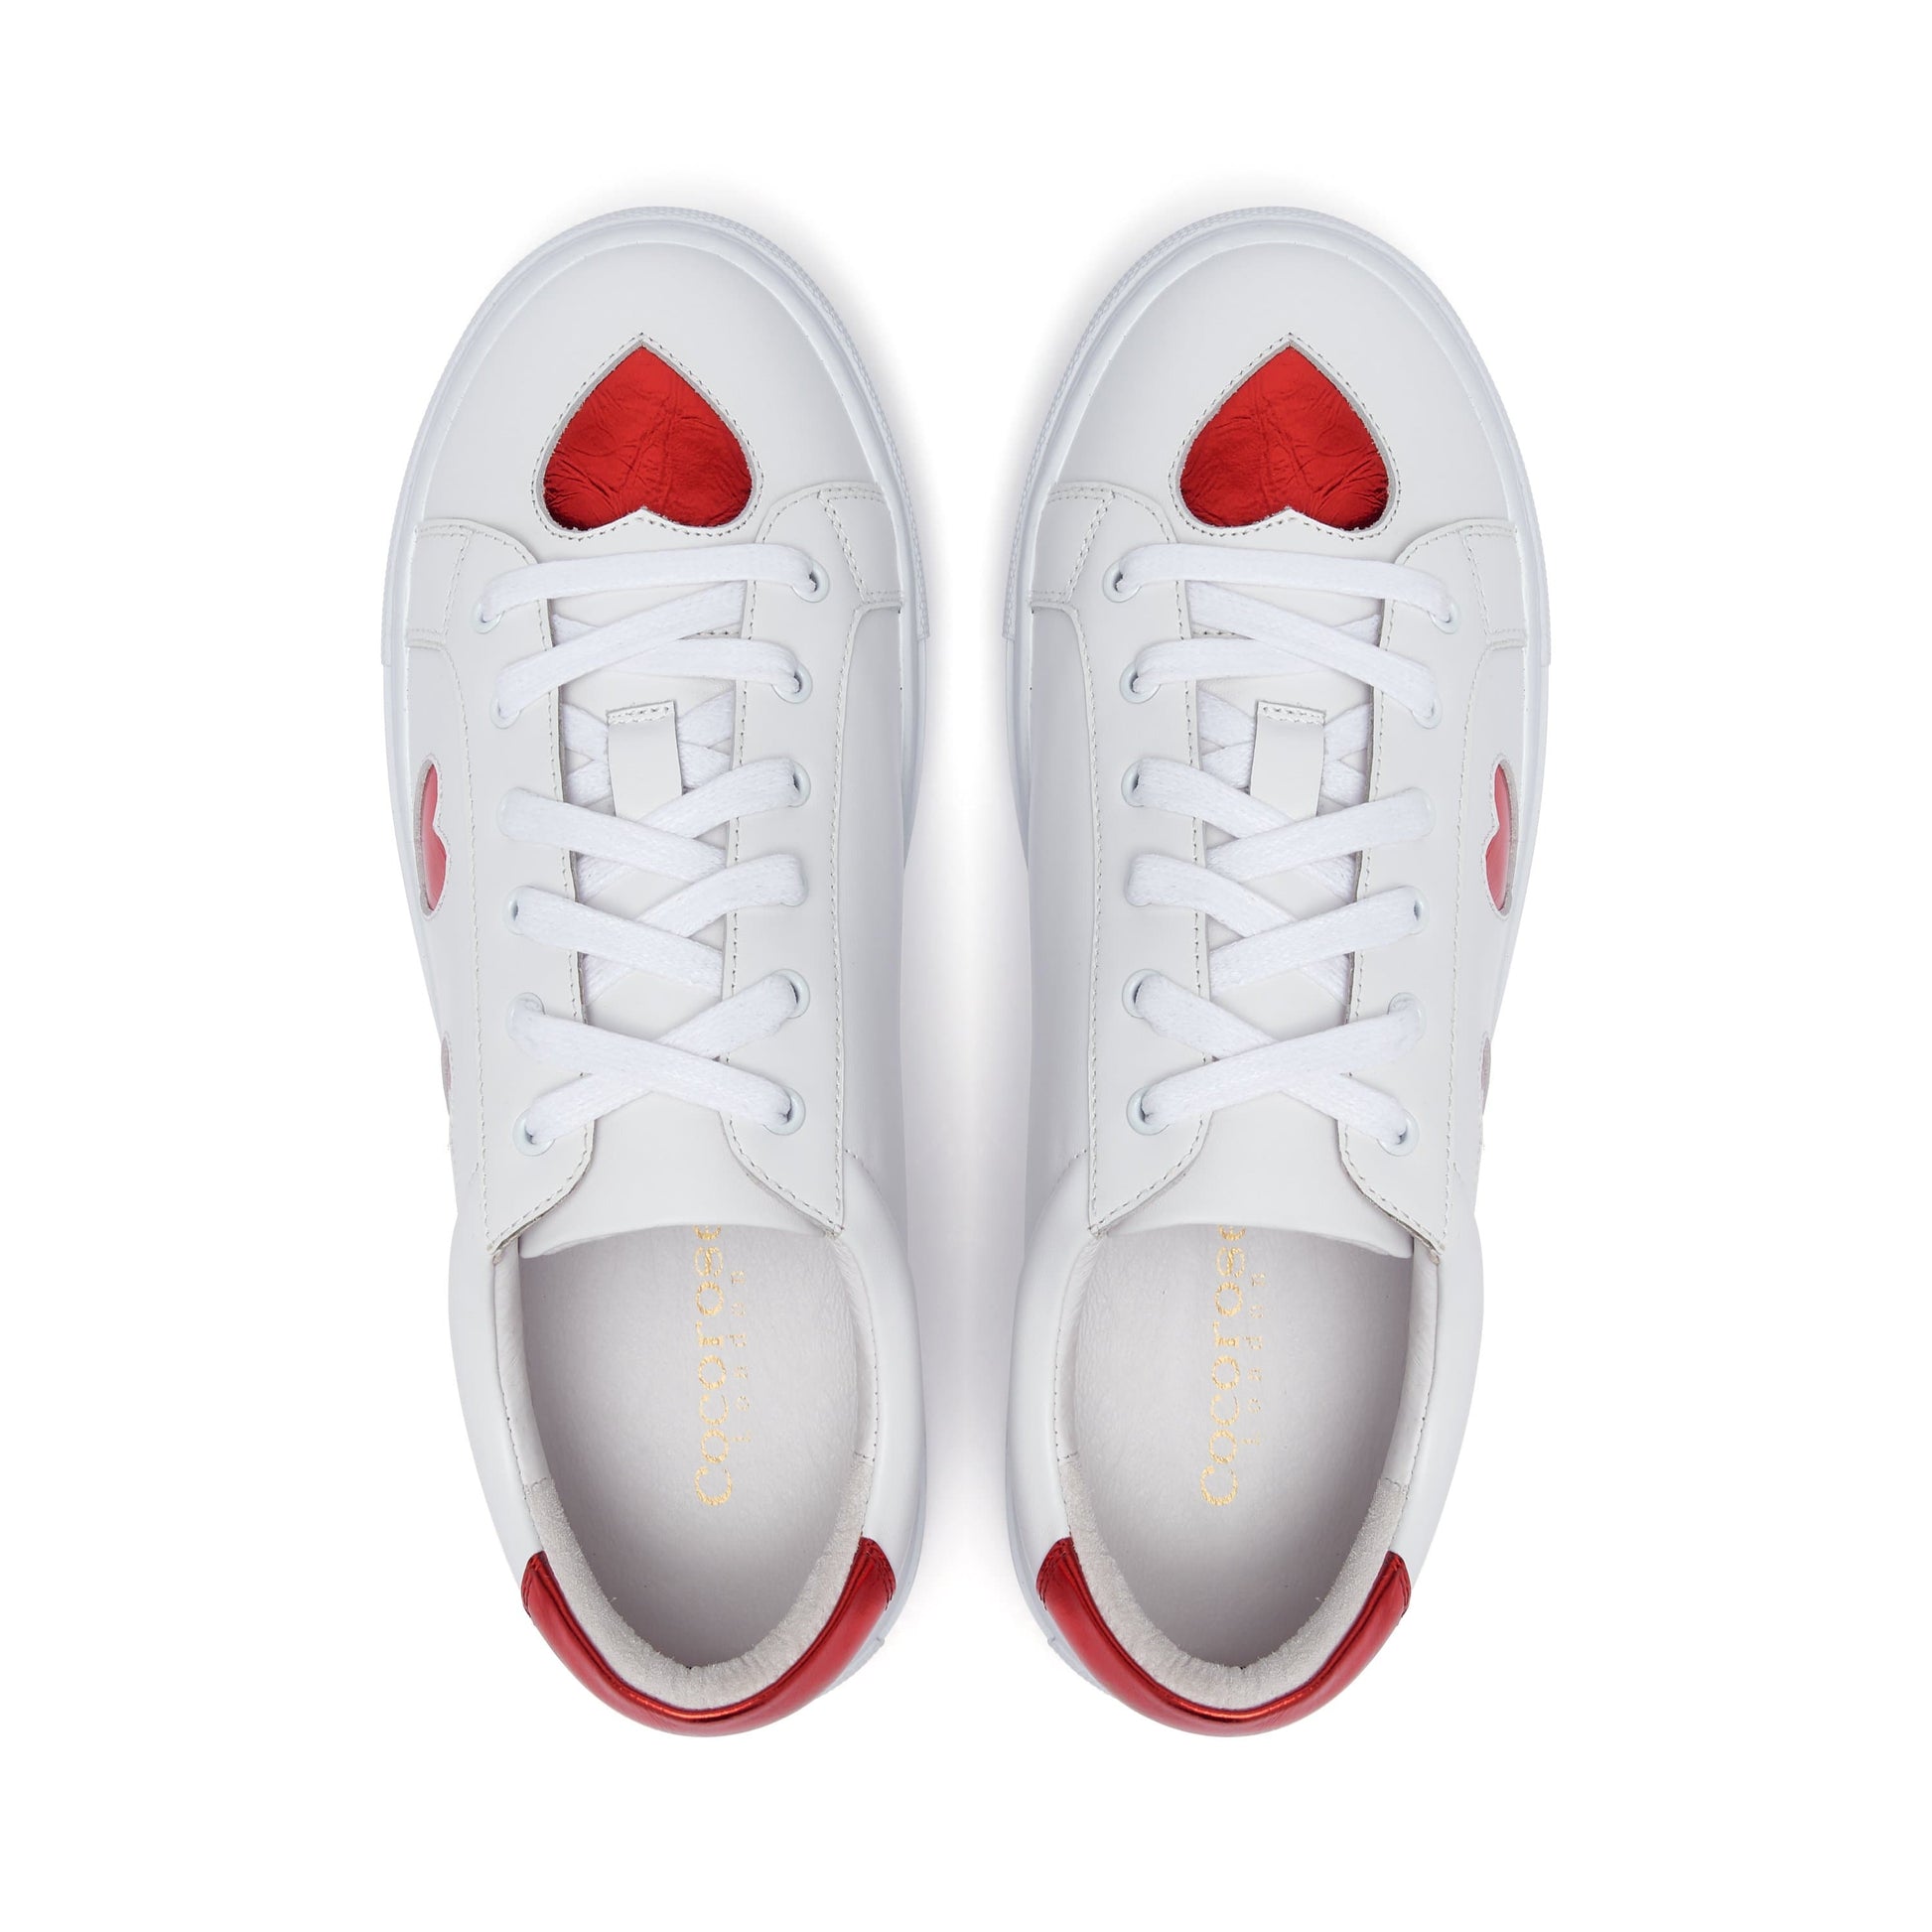 Hoxton - White with Red Hearts Leather Trainers Cocorose London